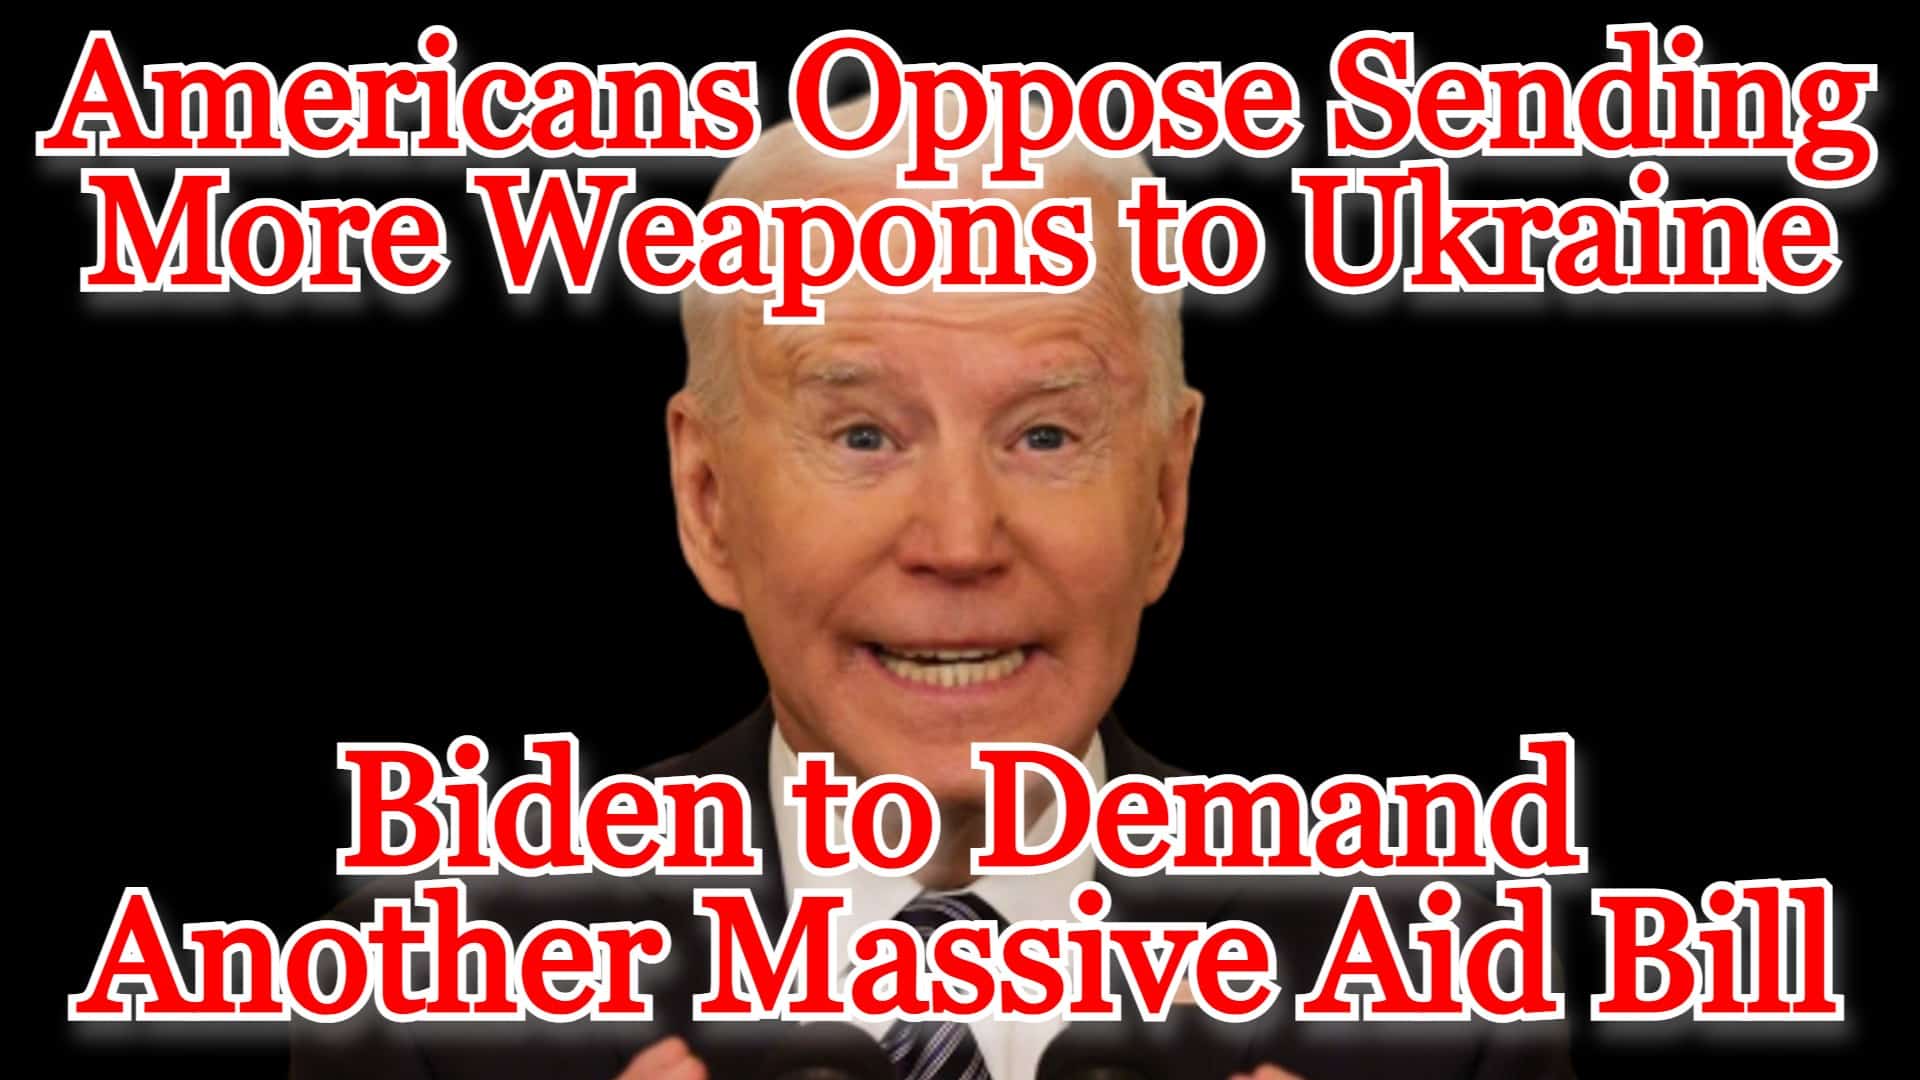 COI #456: Americans Oppose Sending More Weapons to Ukraine, Biden to Demand Another Massive Aid Bill